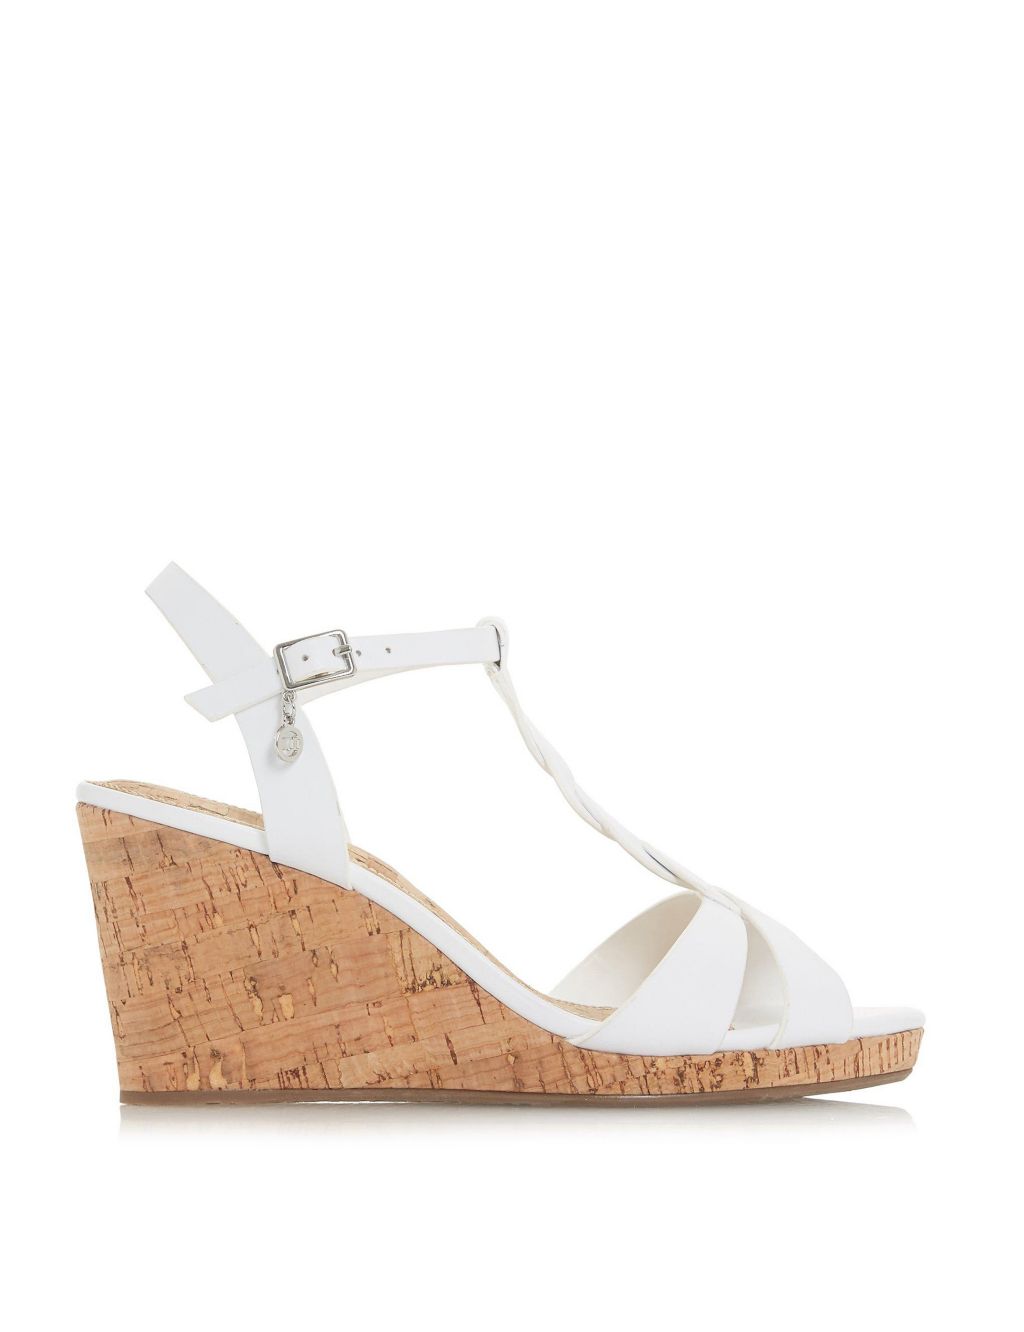 Leather T Bar Wedge Sandals | Dune London | M&S